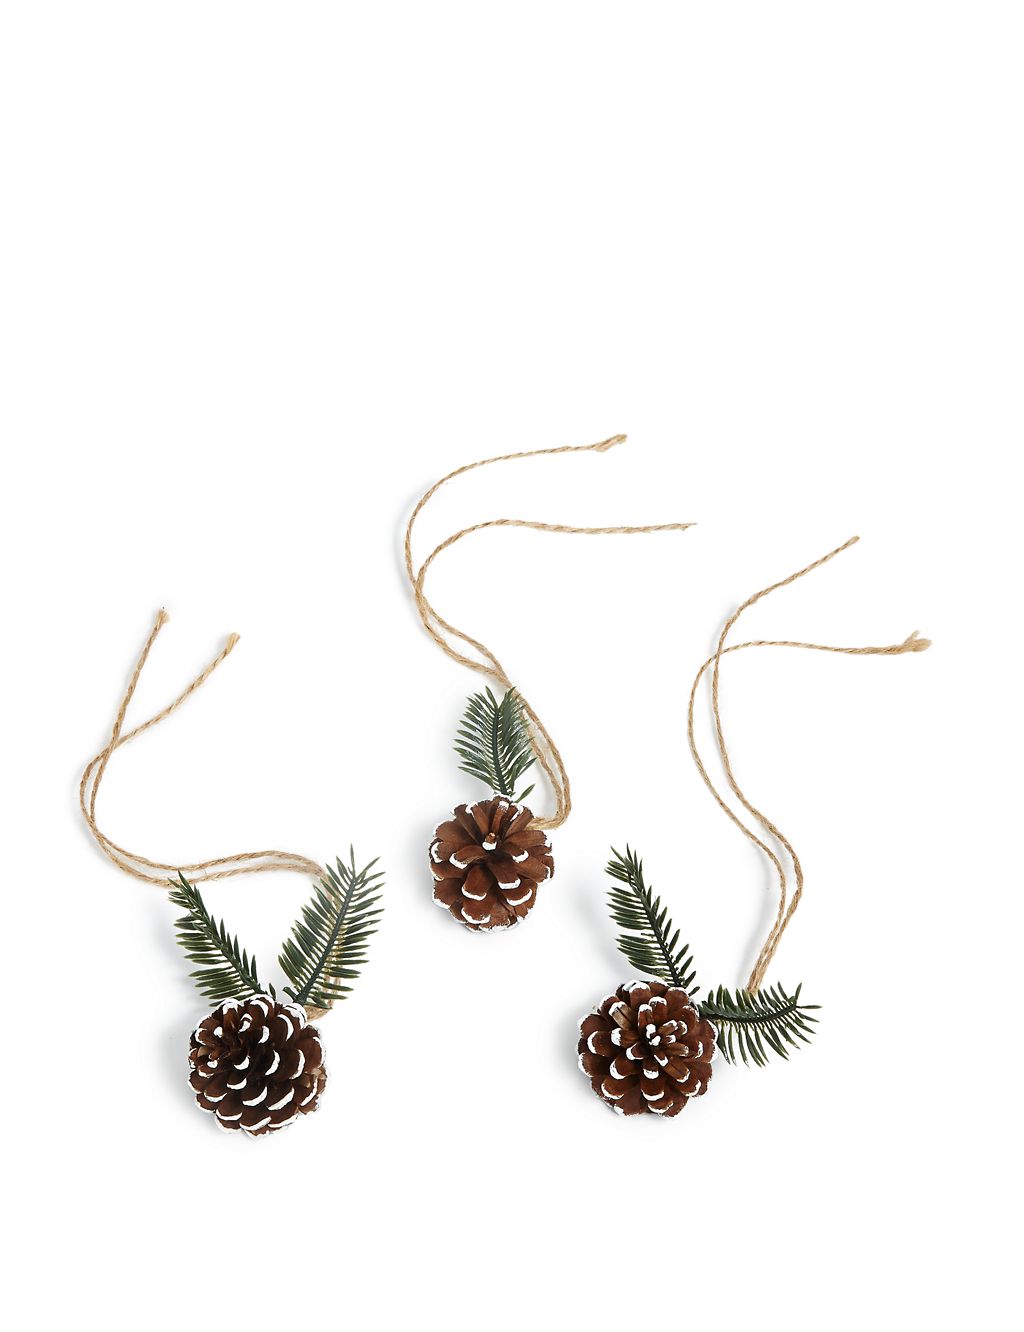 Nordic Noel 3 Pine Cone Present Toppers 1 of 3